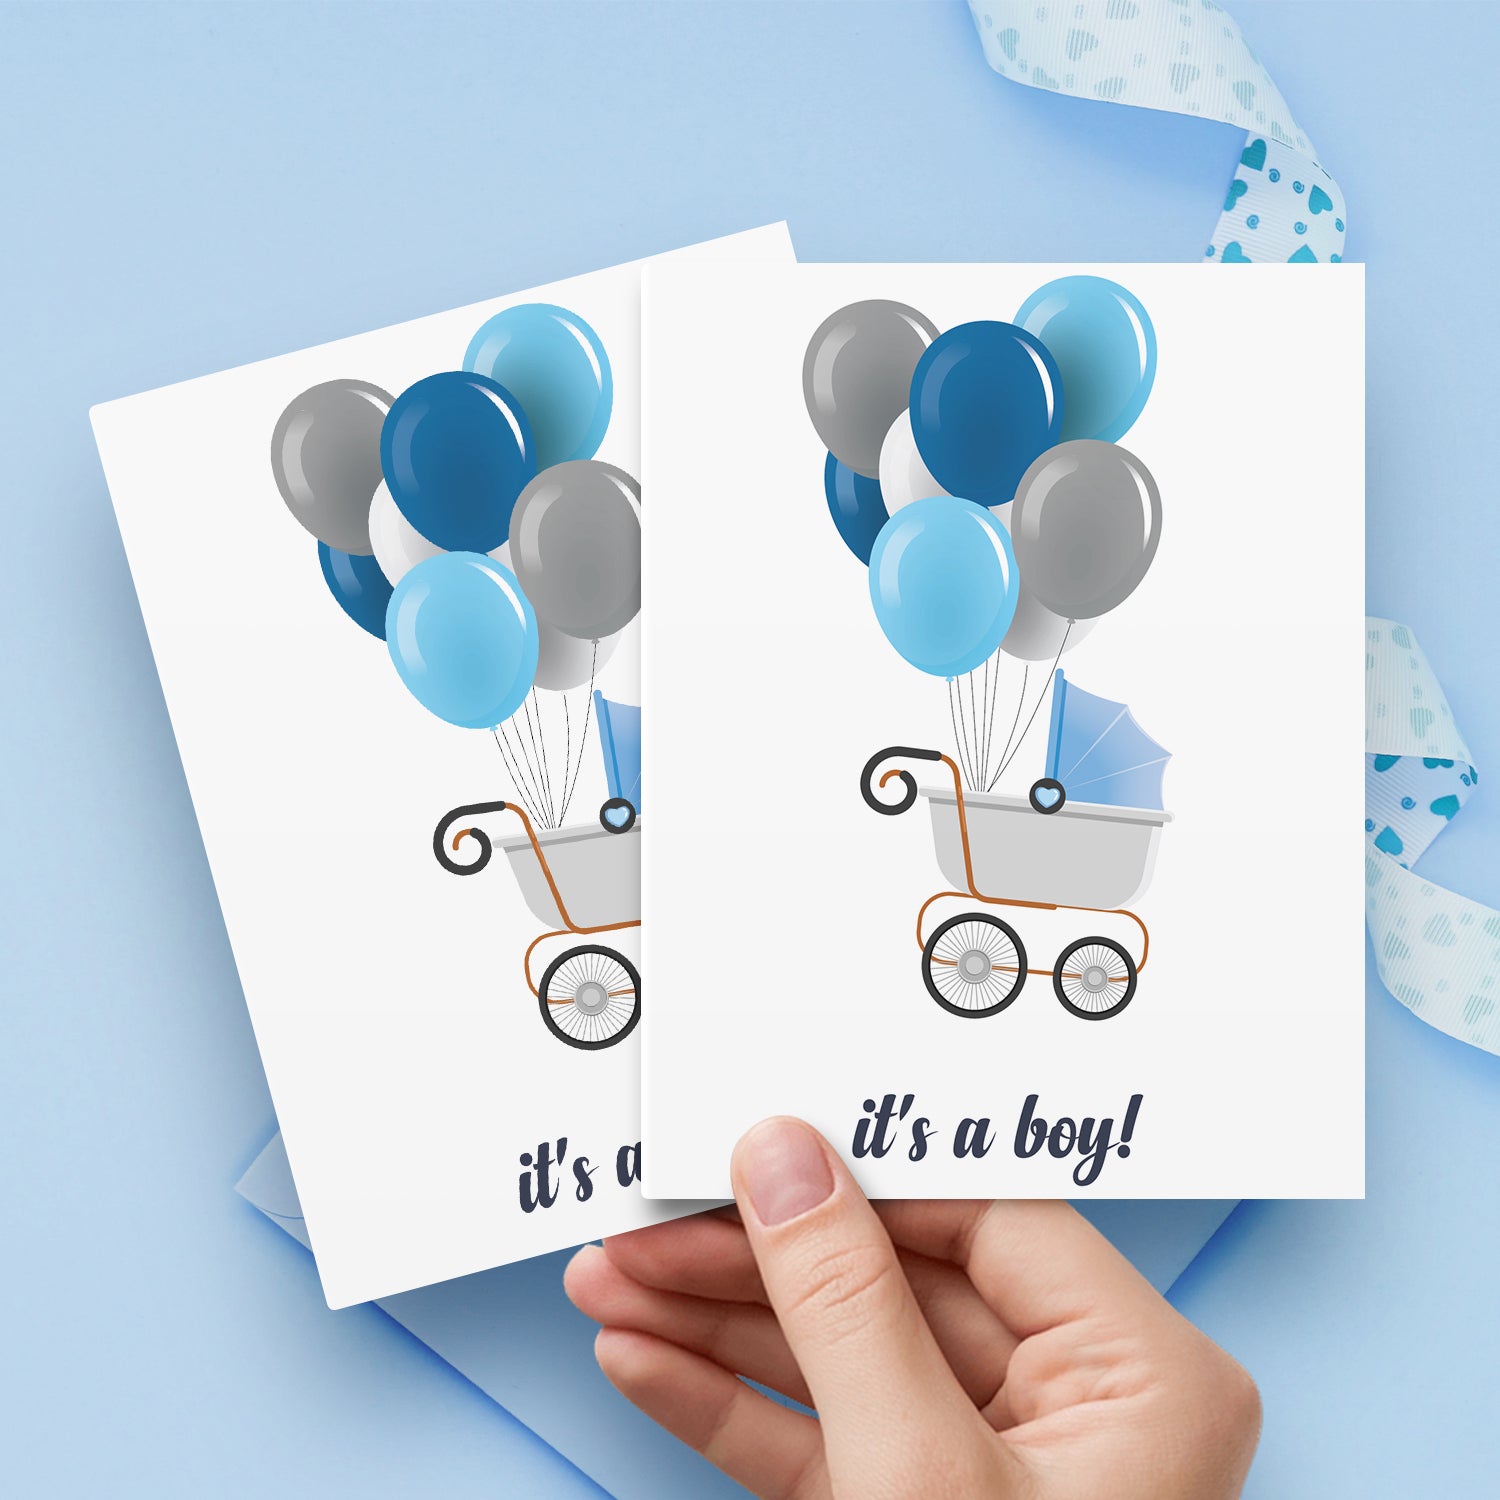 It's A Boy! – Blue Stroller & Balloons – Baby Shower Greeting Cards for New Mom Dad Parents, Welcome New Baby, Congrats, Gender Reveal – 10 per Pack